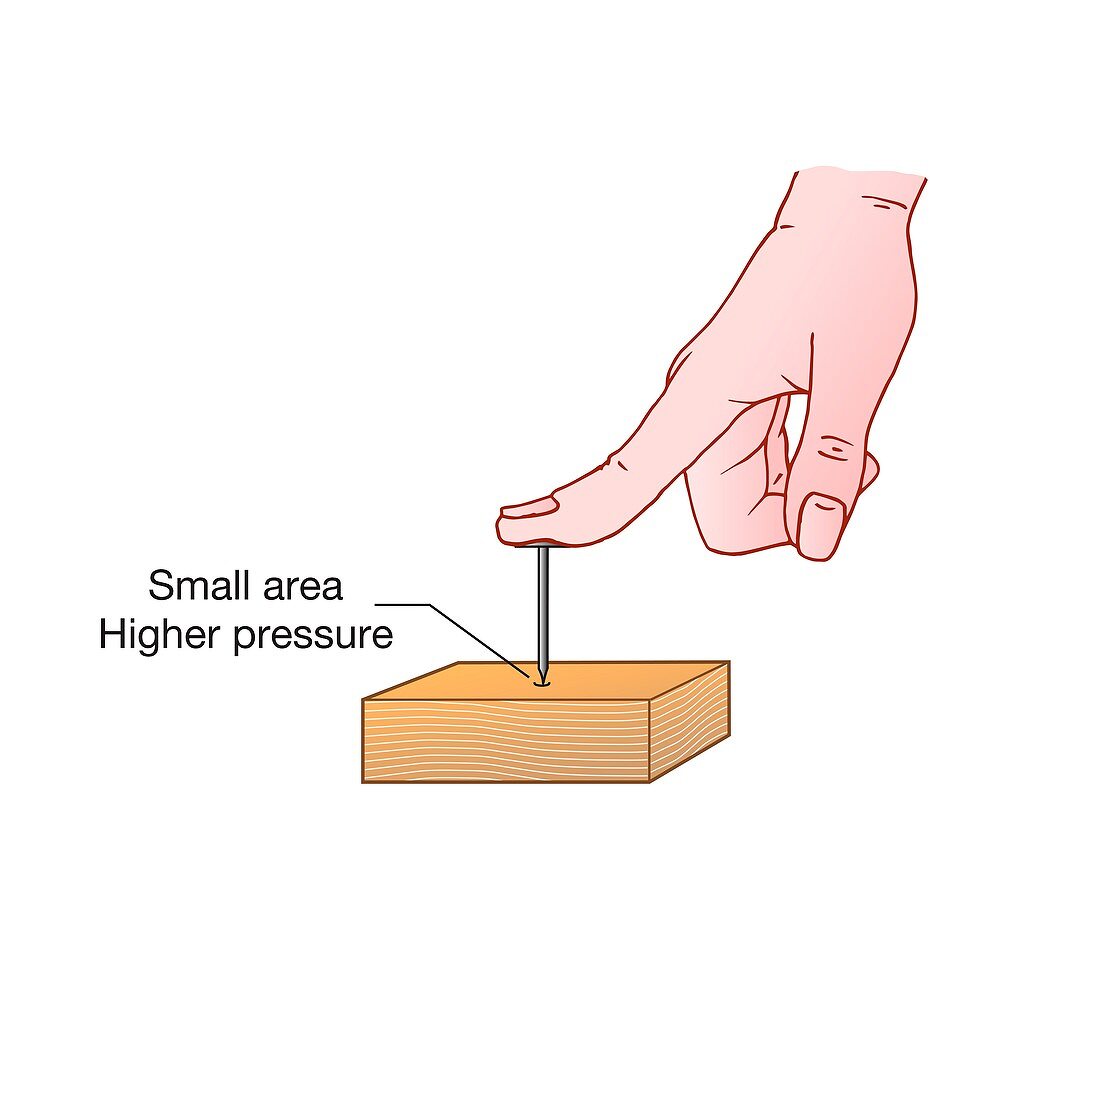 Pressure exerted by finger pushing a nail into wood, illustr